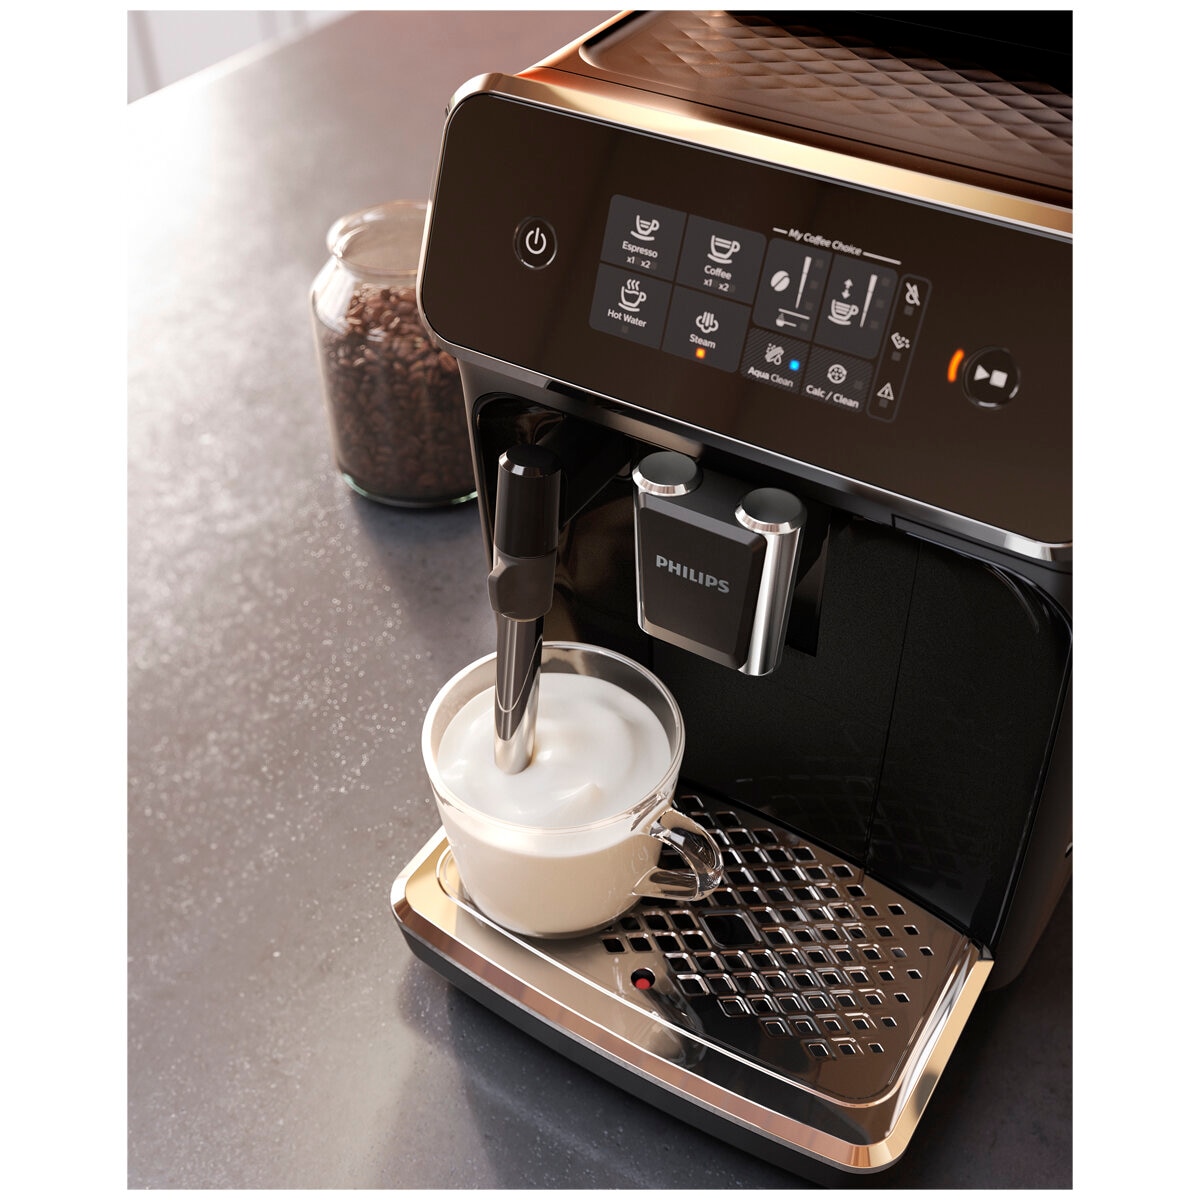 Philips 2200 Series Classic Frother Fully Auto Espresso Machine